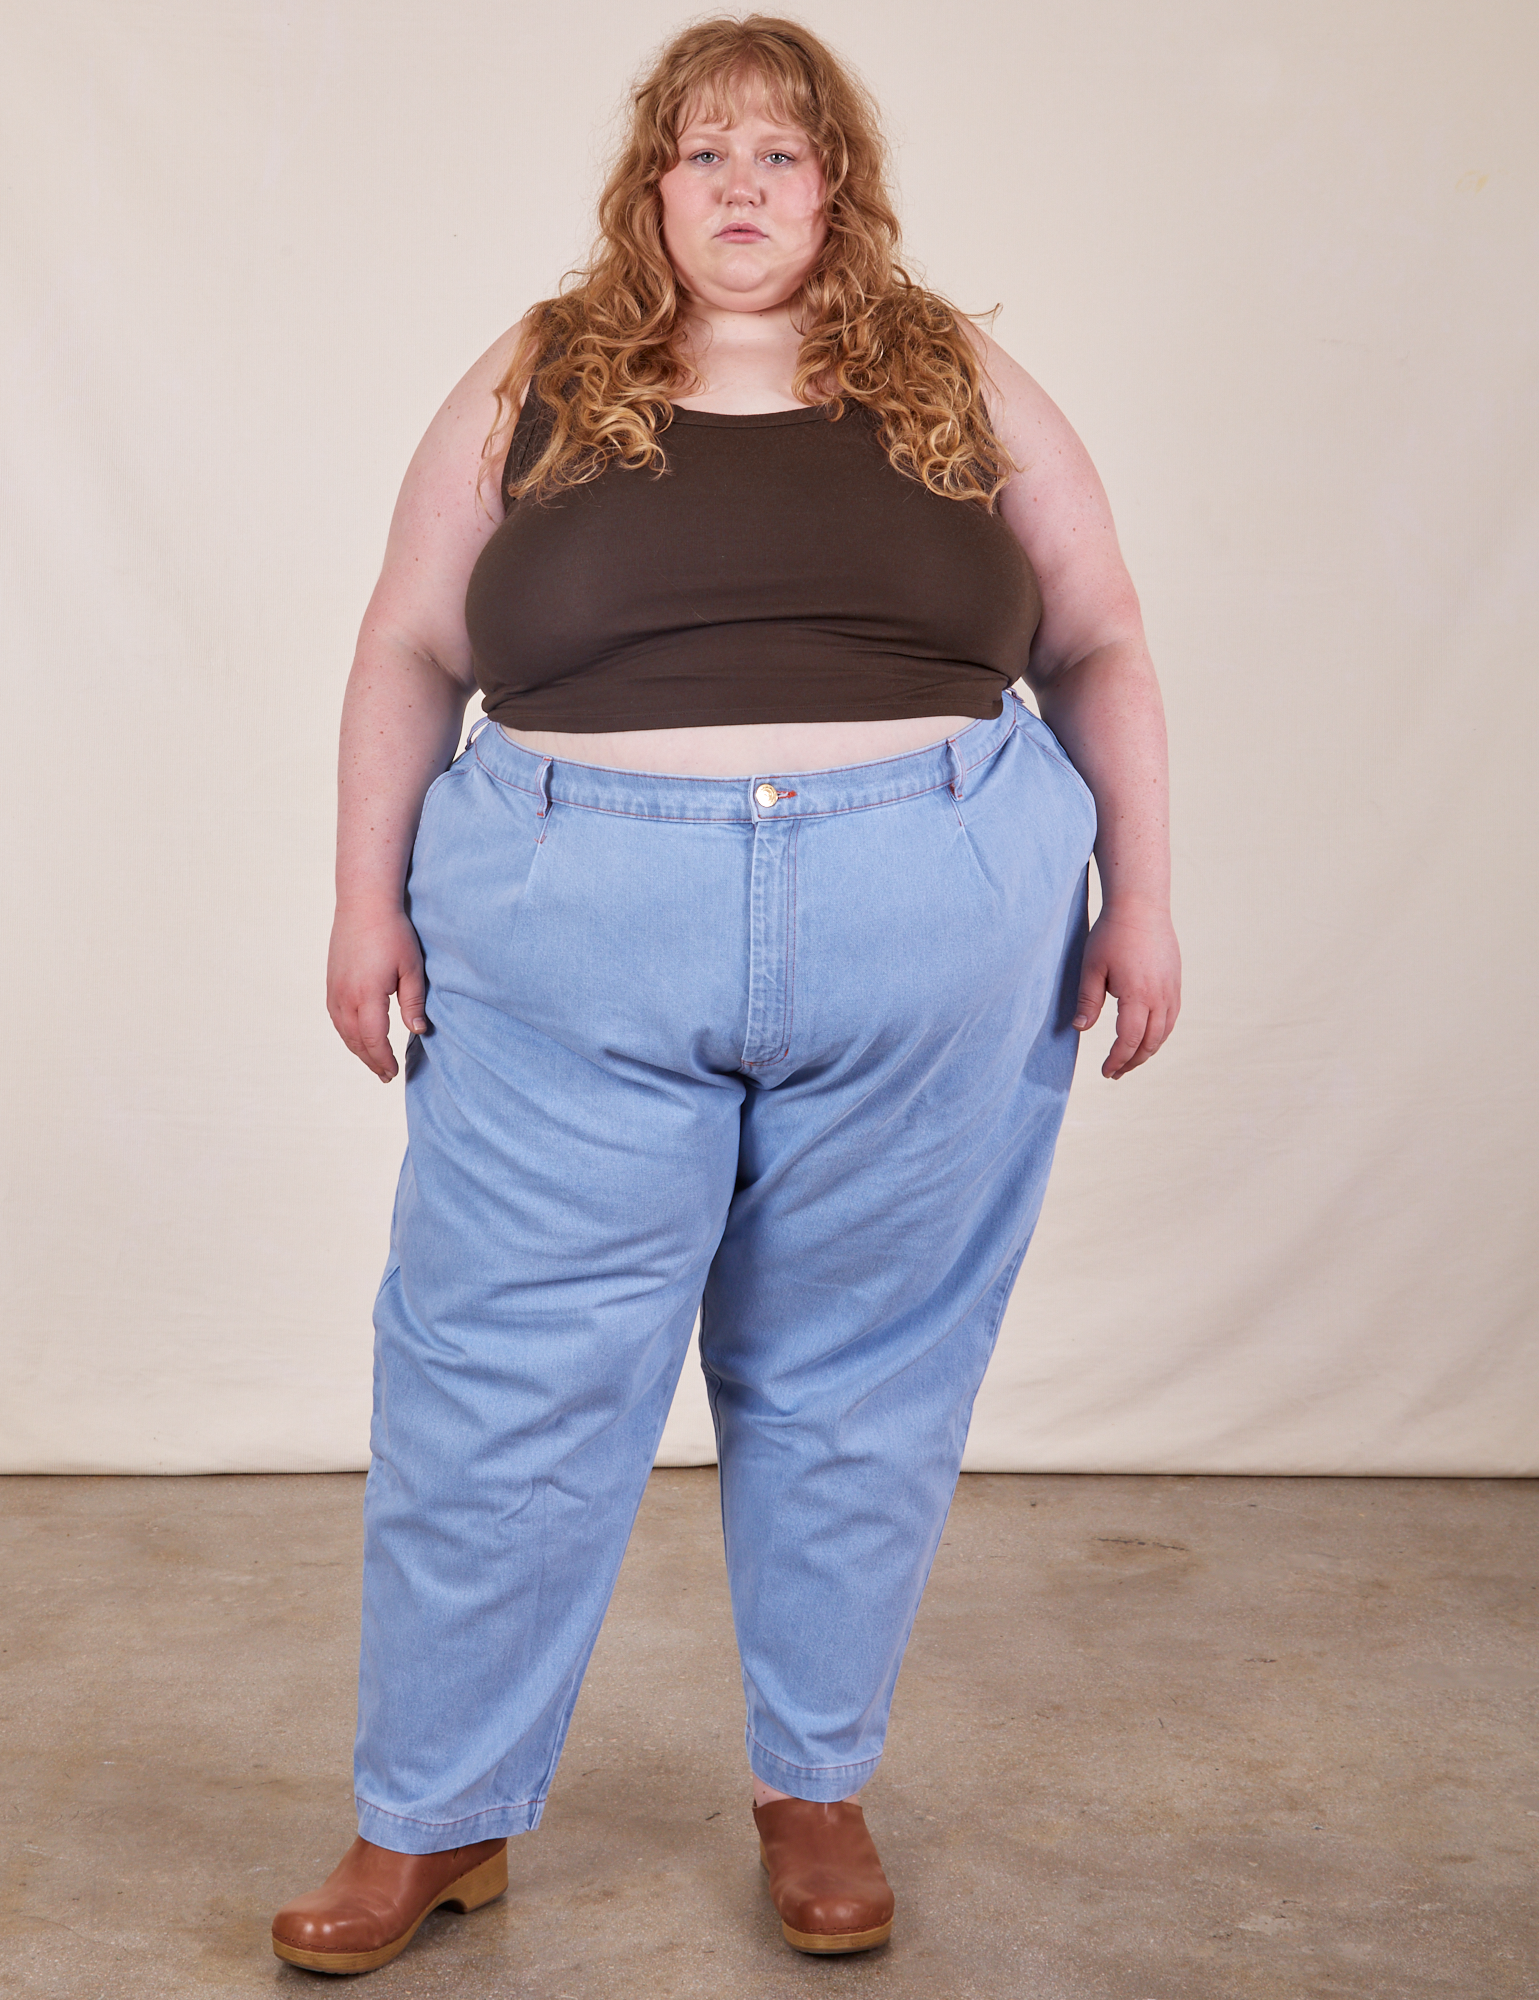 Catie is 5&#39;11&quot; and wearing 4XL Cropped Tank Top in Espresso Brown paired with light wash Denim Trousers